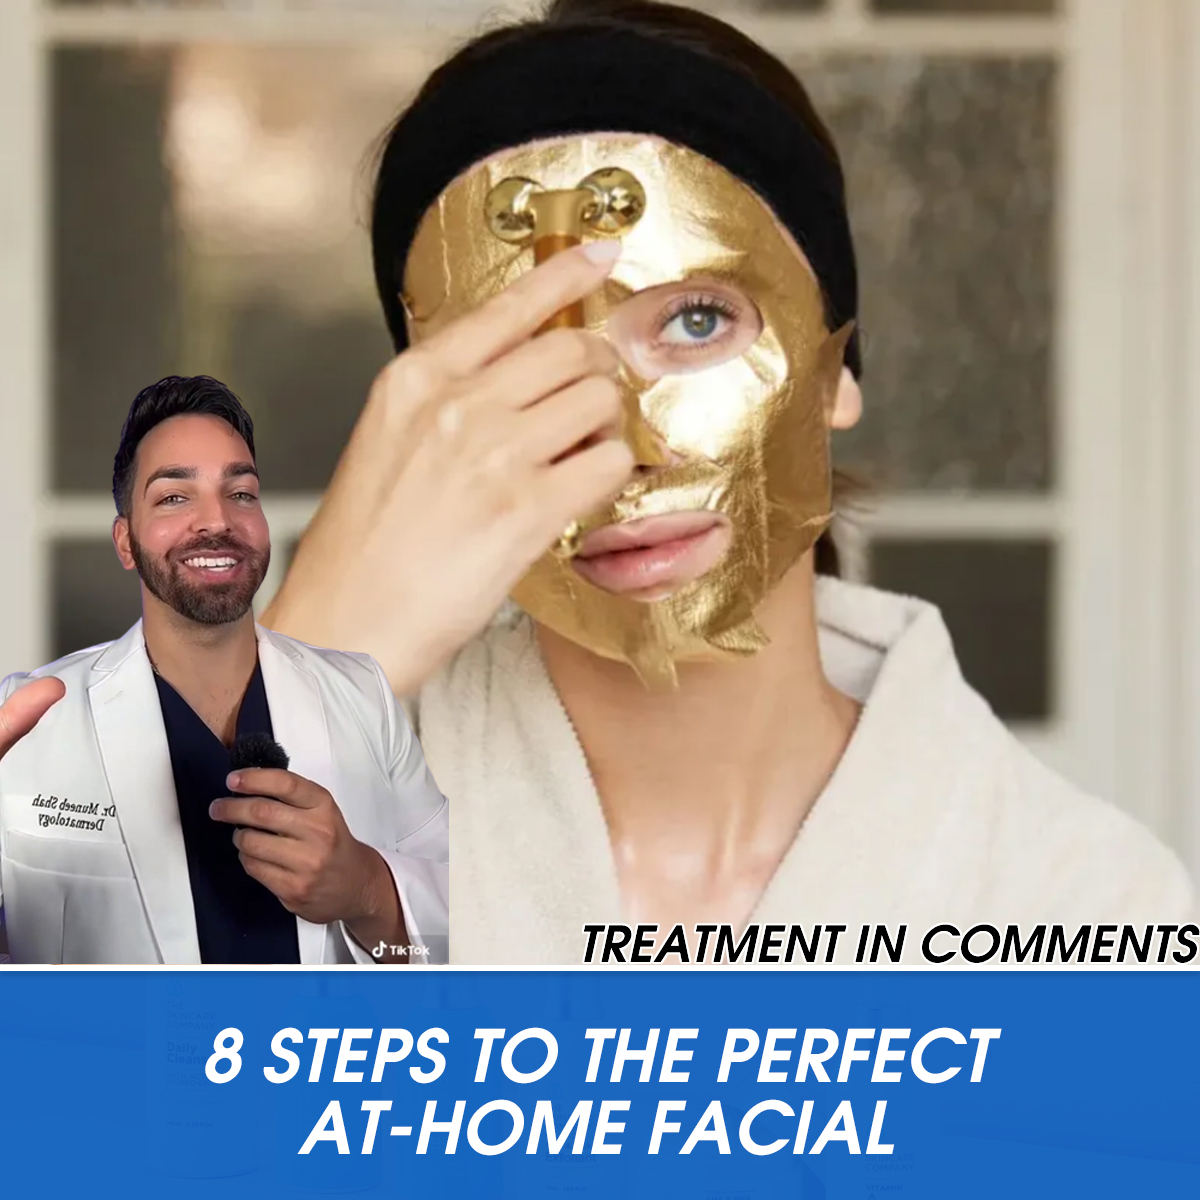 8 Steps to the Perfect At-Home Facial